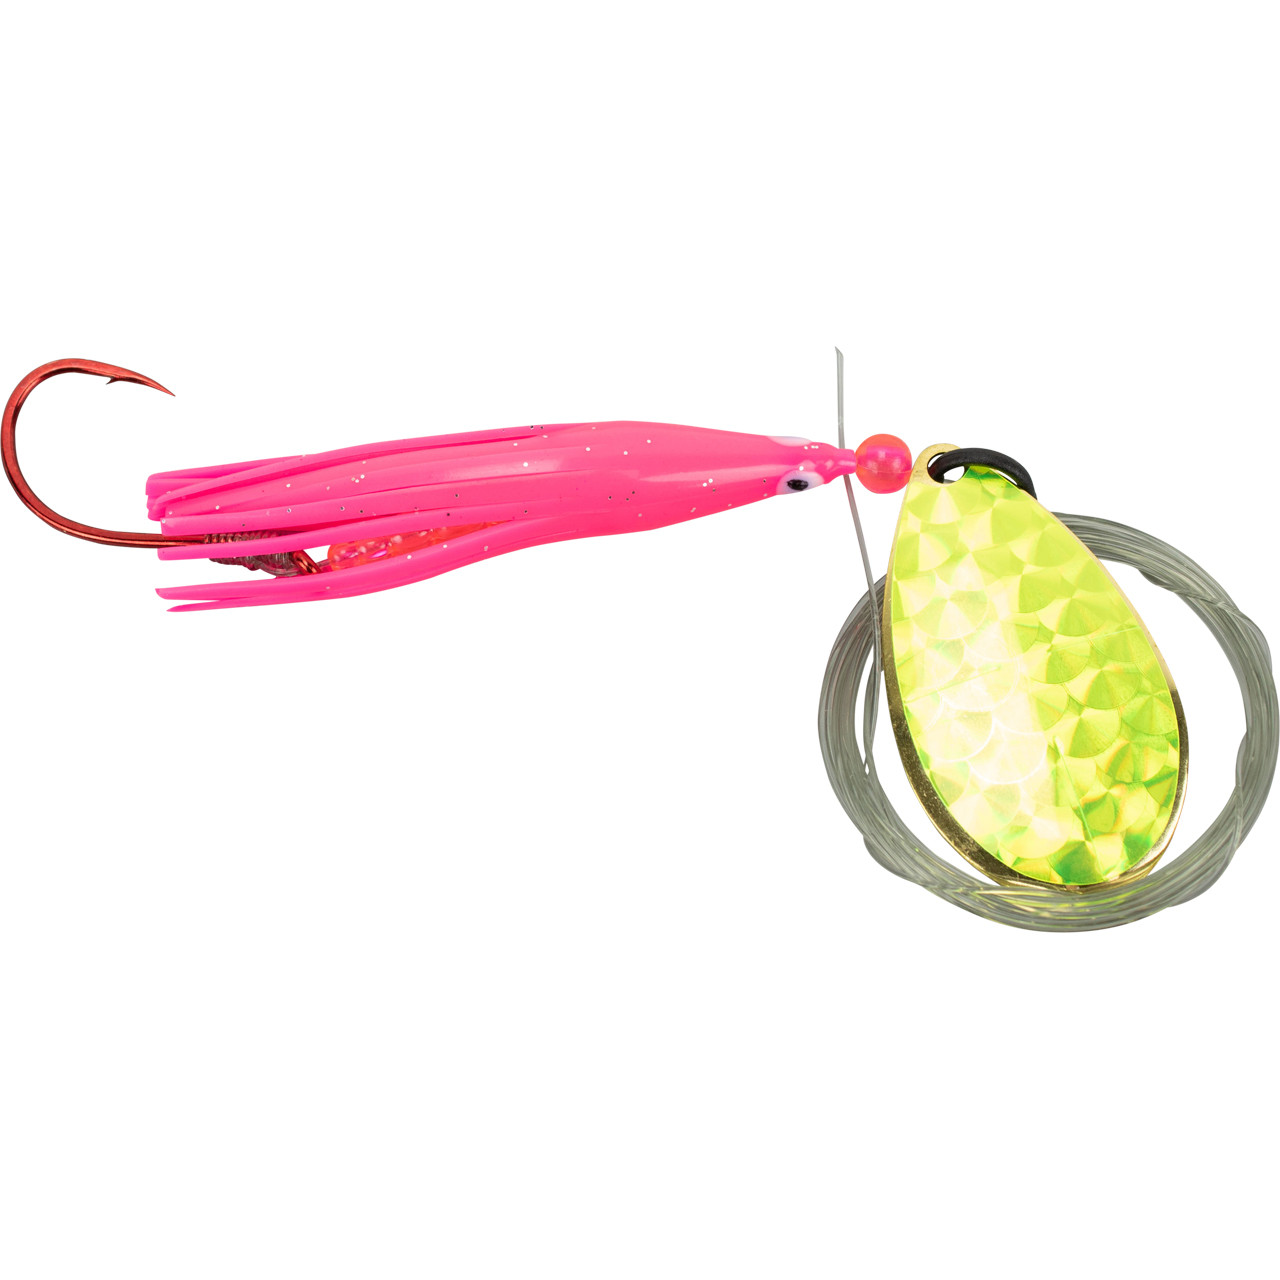 Wicked Lures Products - www.wickedlures.com